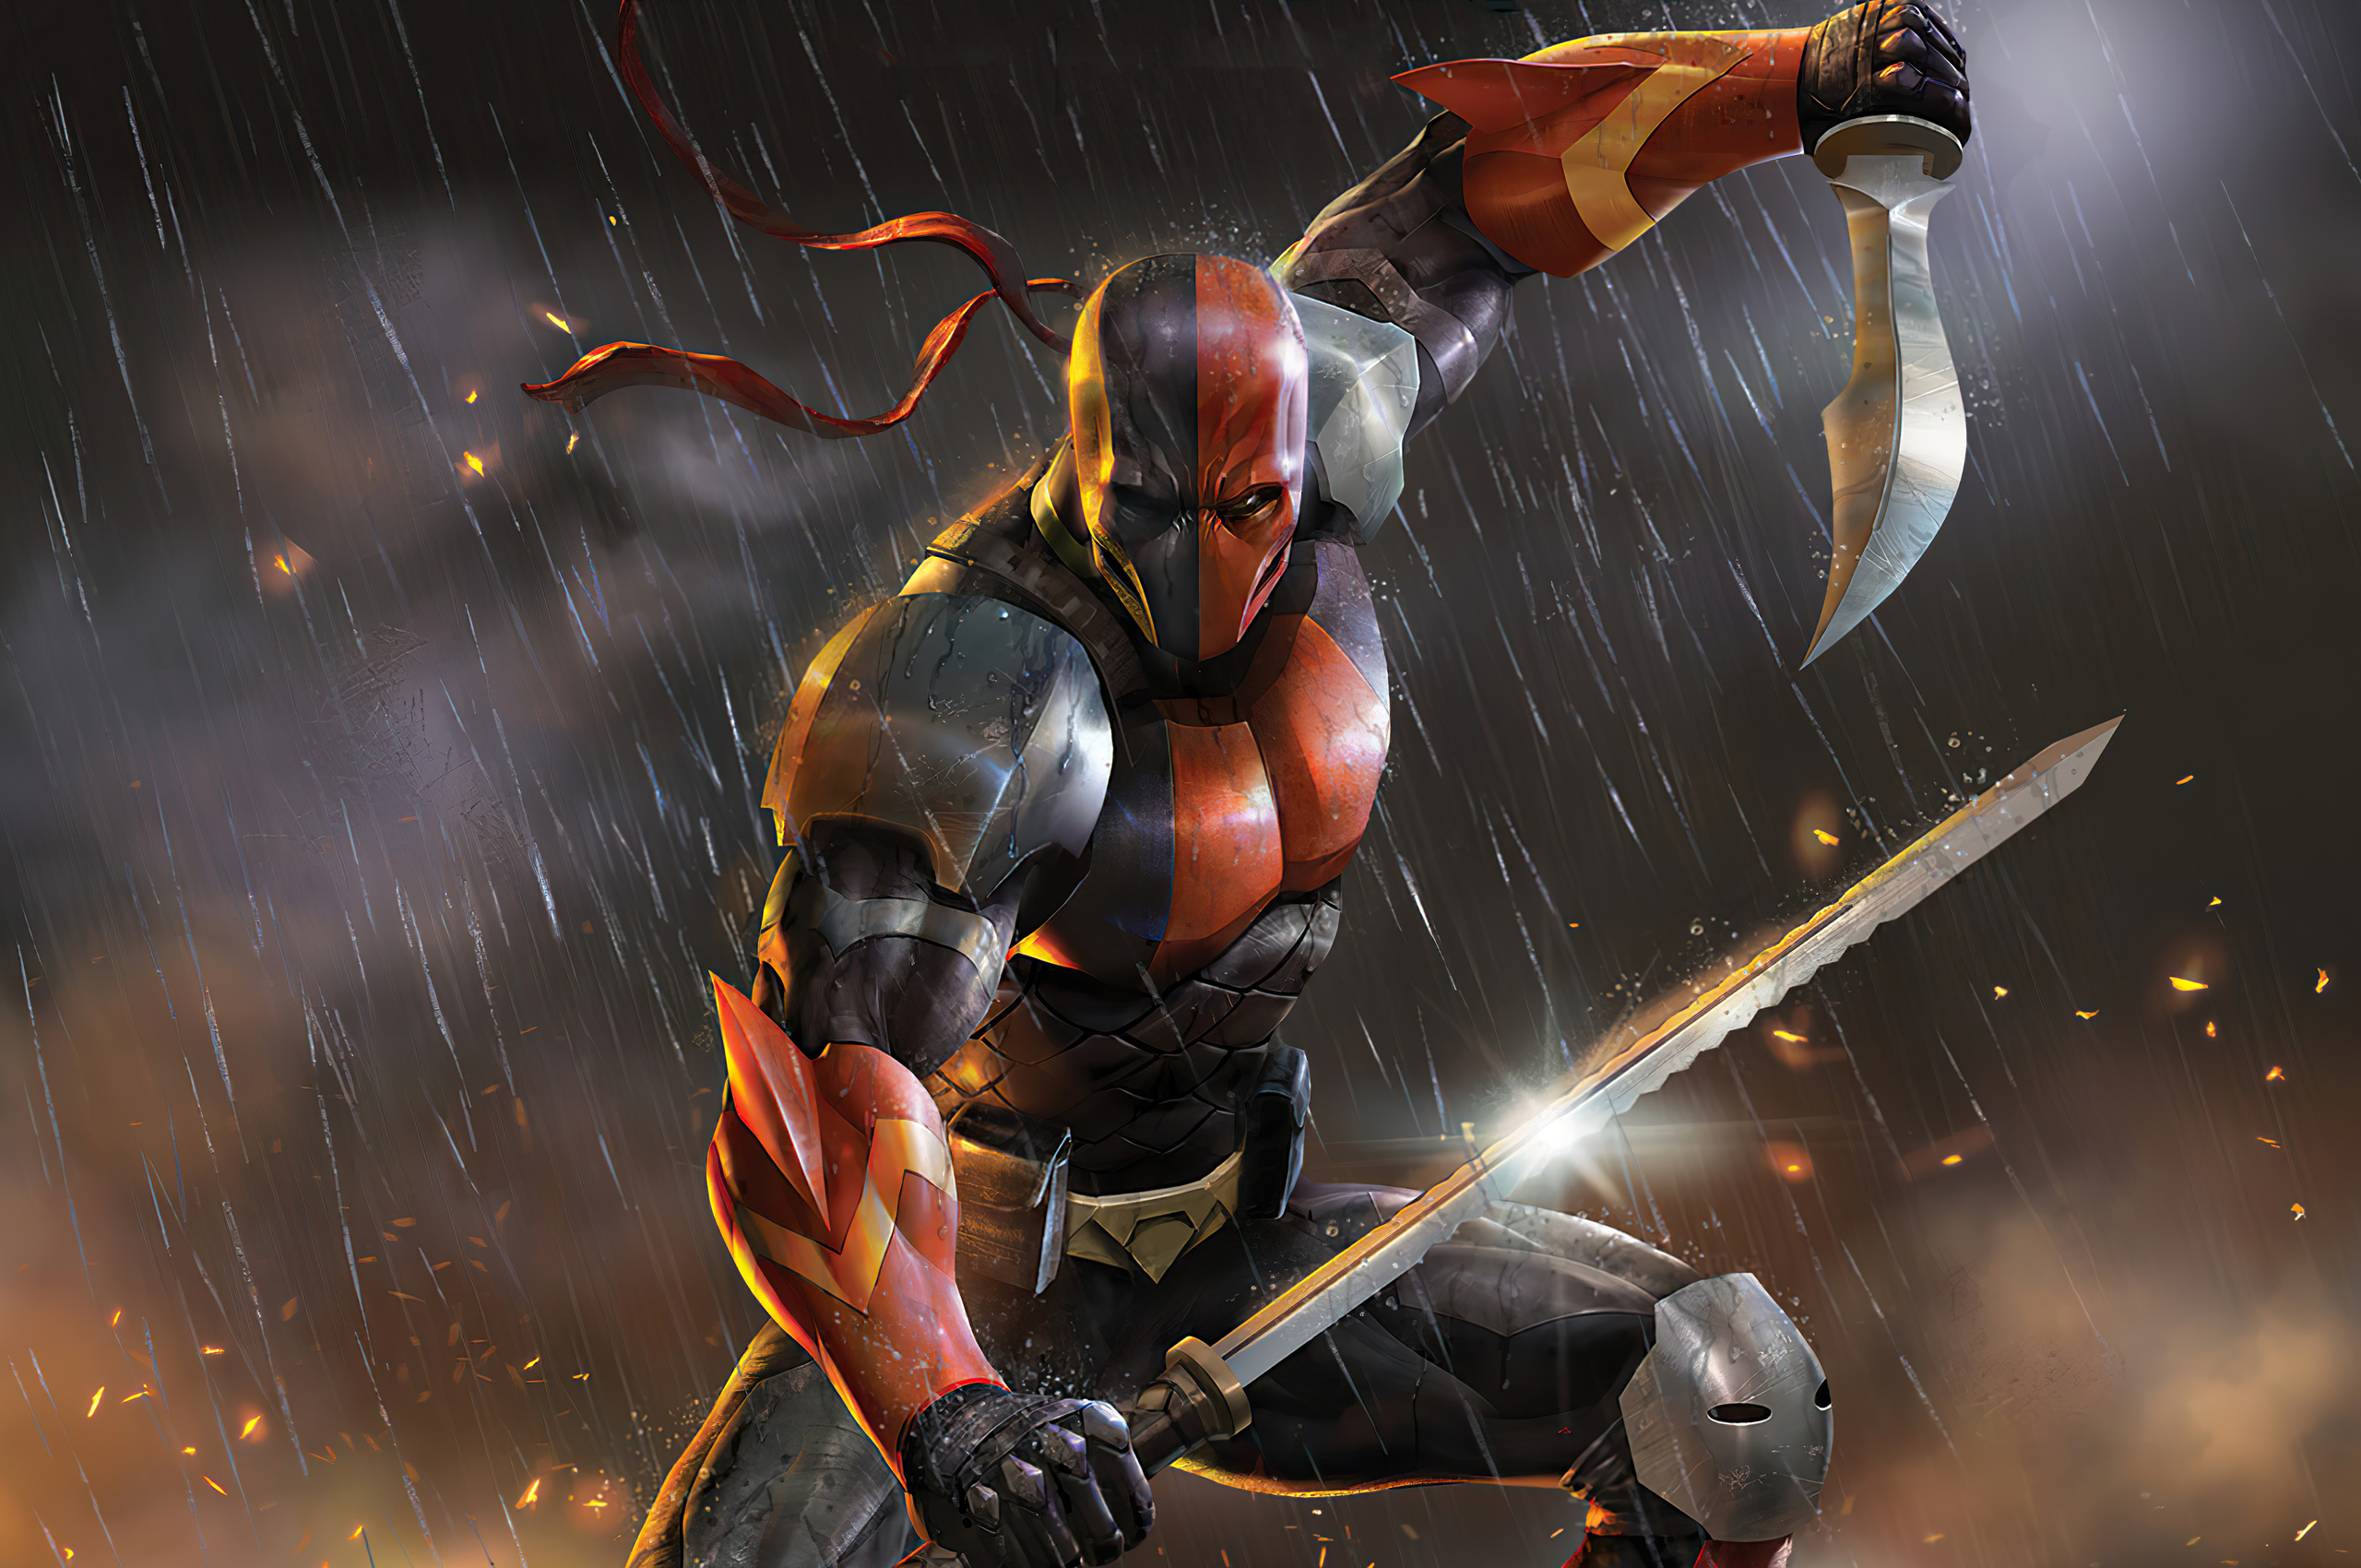 deathstroke-knights-and-dragons-5k-xs.jpg